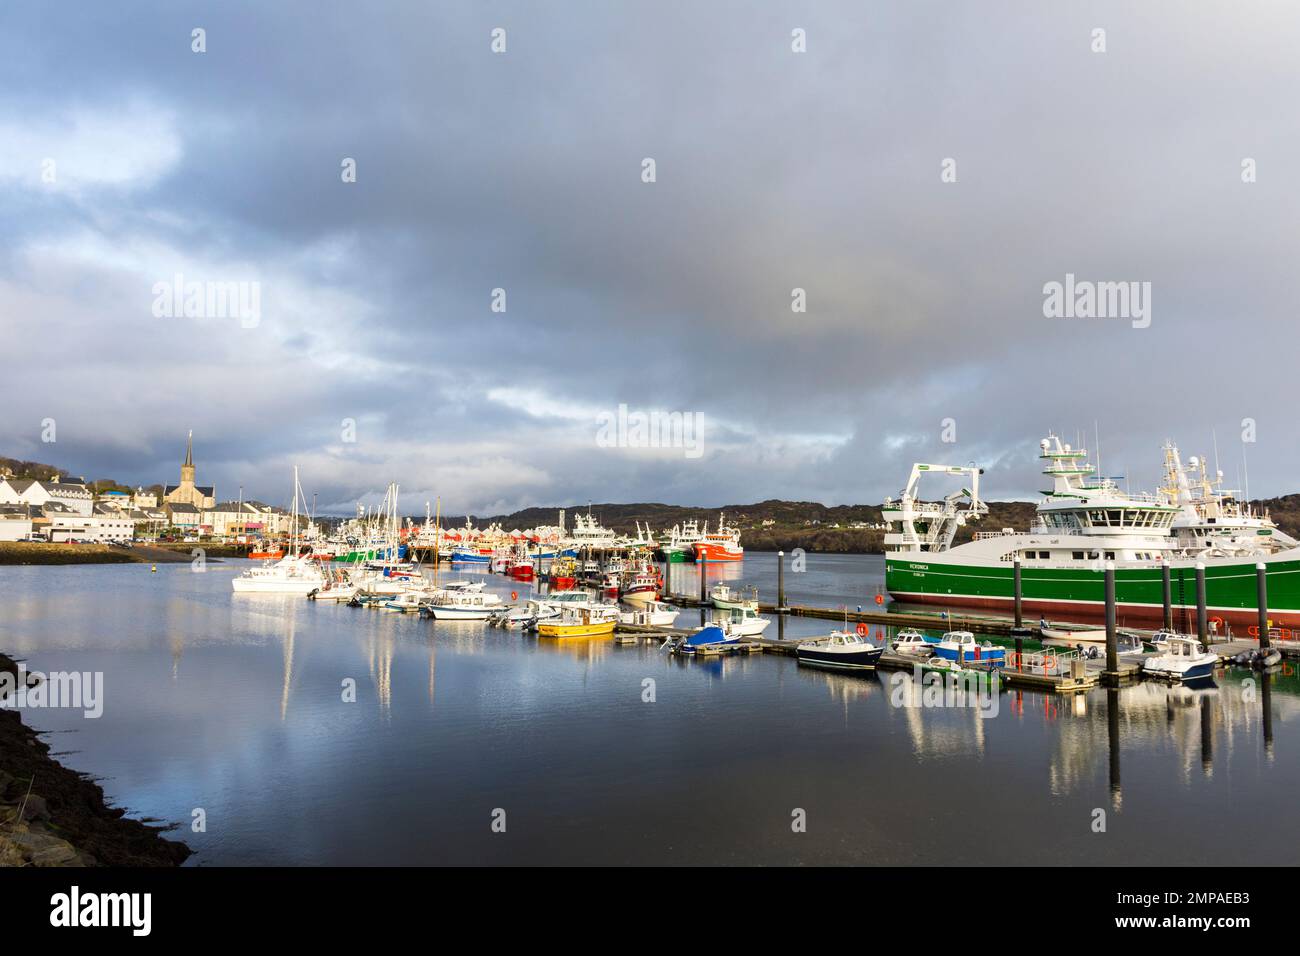 Killybegs fishing port, trawlers, boats and yachts moored up. County Donegal, Ireland Stock Photo